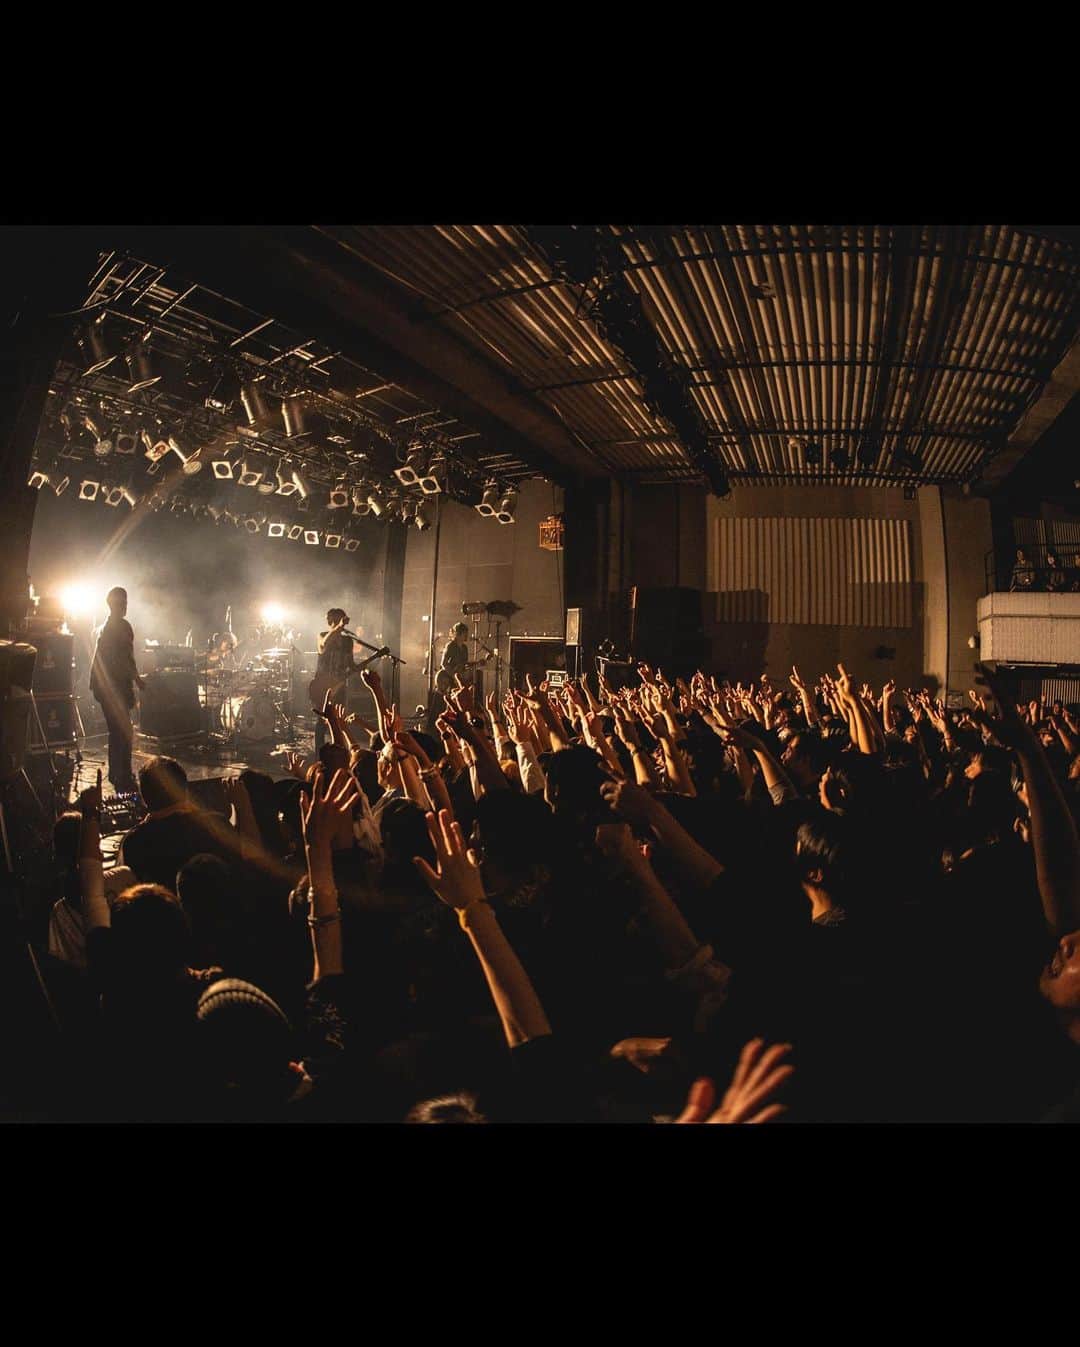 Nothing’s Carved In Stoneのインスタグラム：「【RULE’s】 ⁡ MEMBERSHIP SITE “RULE’s”にてPHOTOを更新しました。 ⁡ ”15th Anniversary Tour 〜Hand In Hand〜” 2023.10.27 at 札幌PENNY LANE24 ⁡ https://fc.ncis.jp ⁡ Photo by ヤリミズユウスケ ⁡ ——————— "15th Anniversary Tour 〜Hand In Hand〜" ⁡ 11月19日(日)Zepp DiverCity(TOKYO) OPEN 17:00 / START 18:00 w/ MAN WITH A MISSION ※Thank You Sold Out!! ⁡ ——————— "15th Anniversary “Live at BUDOKAN” 2024年2月24日(土)日本武道館 OPEN 16:30 / START 17:30 ⁡ ▼ツアーWEB先行受付中(先着)！ https://eplus.jp/ncis-hp/ ⁡ #NothingsCarvedInStone #ナッシングス #NCIS #SilverSunRecords #HandInHand #鋭児 #TheBONEZ #THEORALCIGARETTES #wodband #NOISEMAKER #coldrain #MyHairisBad #MANWITHAMISSION」